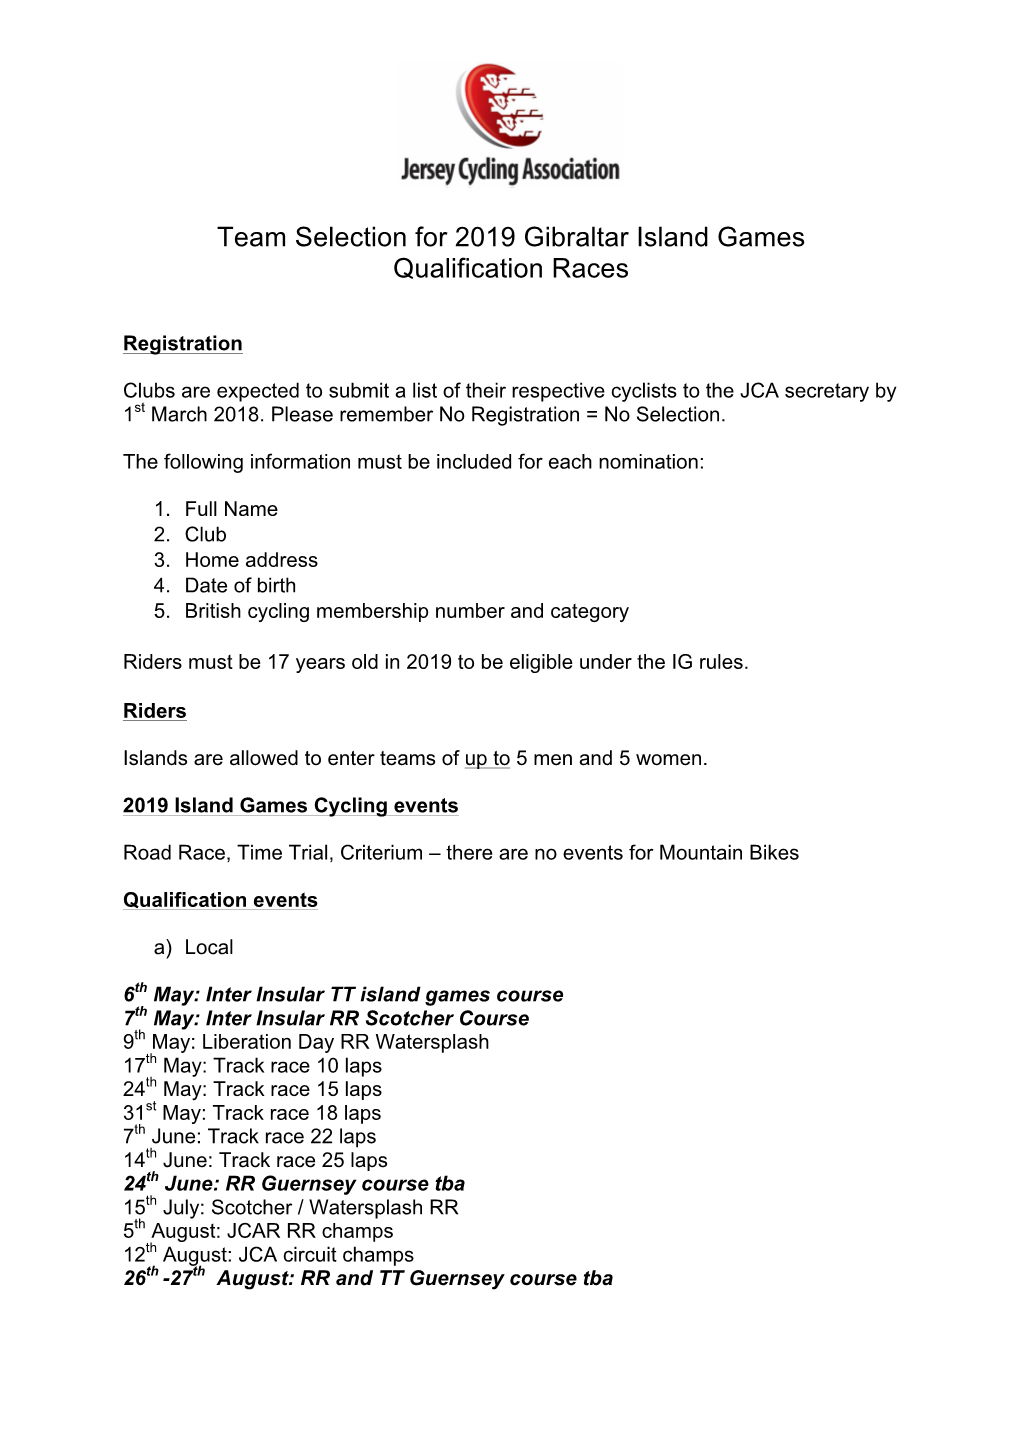 Team Selection for 2019 Gibraltar Island Games Qualification Races